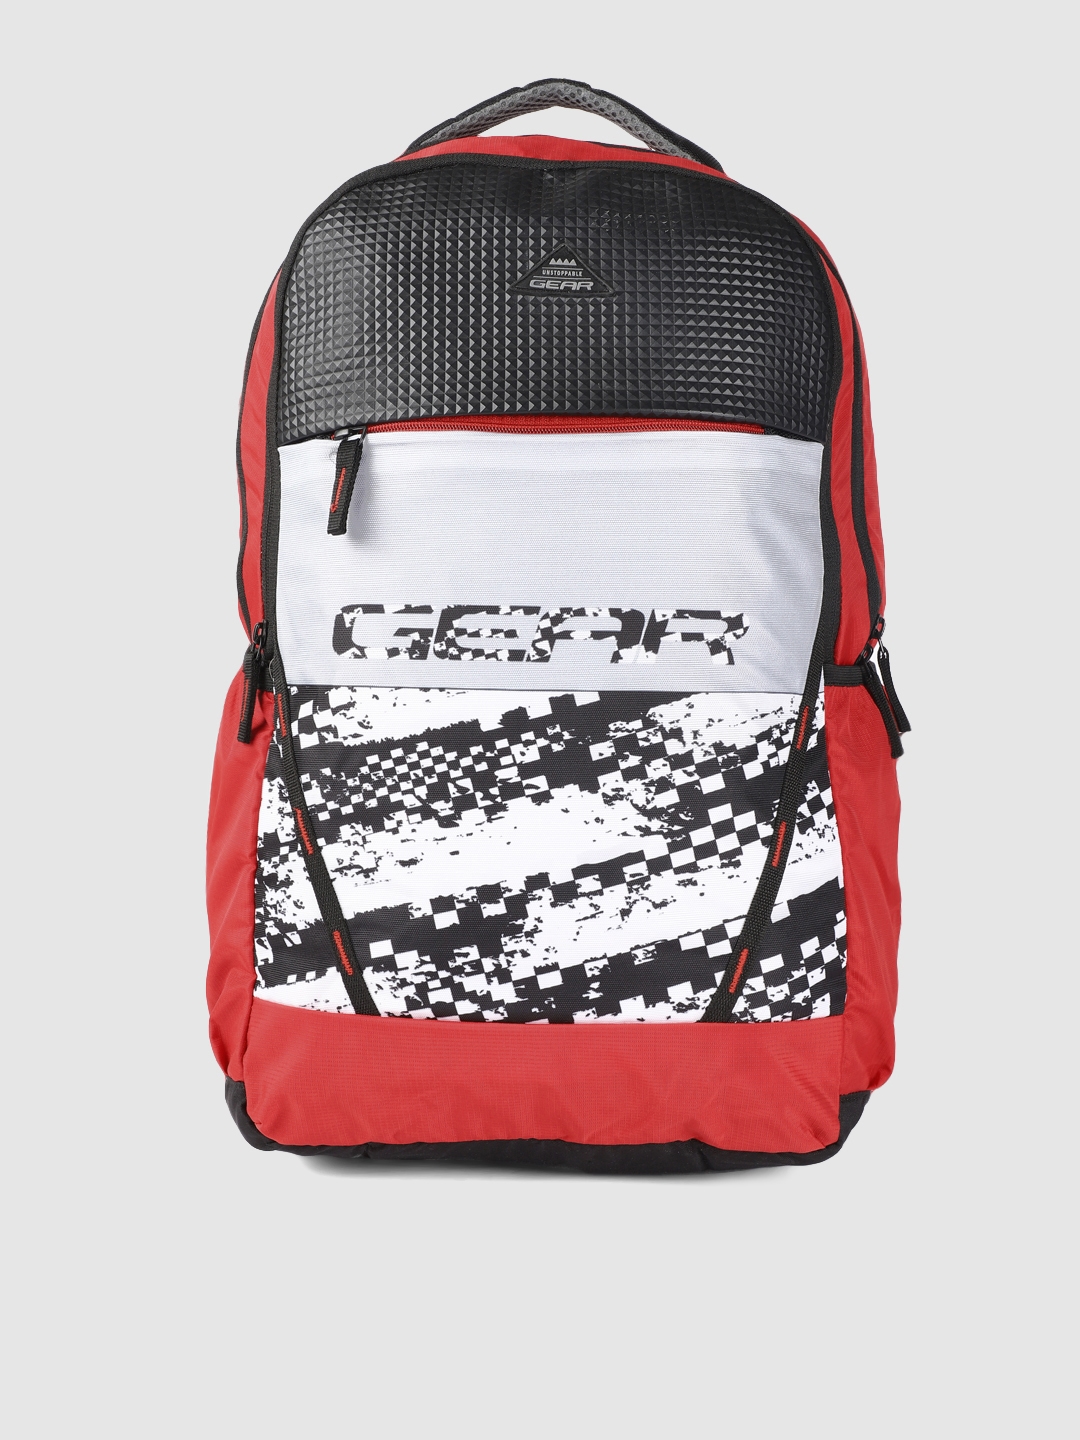 Gear Unisex Black   White Graphic Printed SCHOOL 04 Backpack